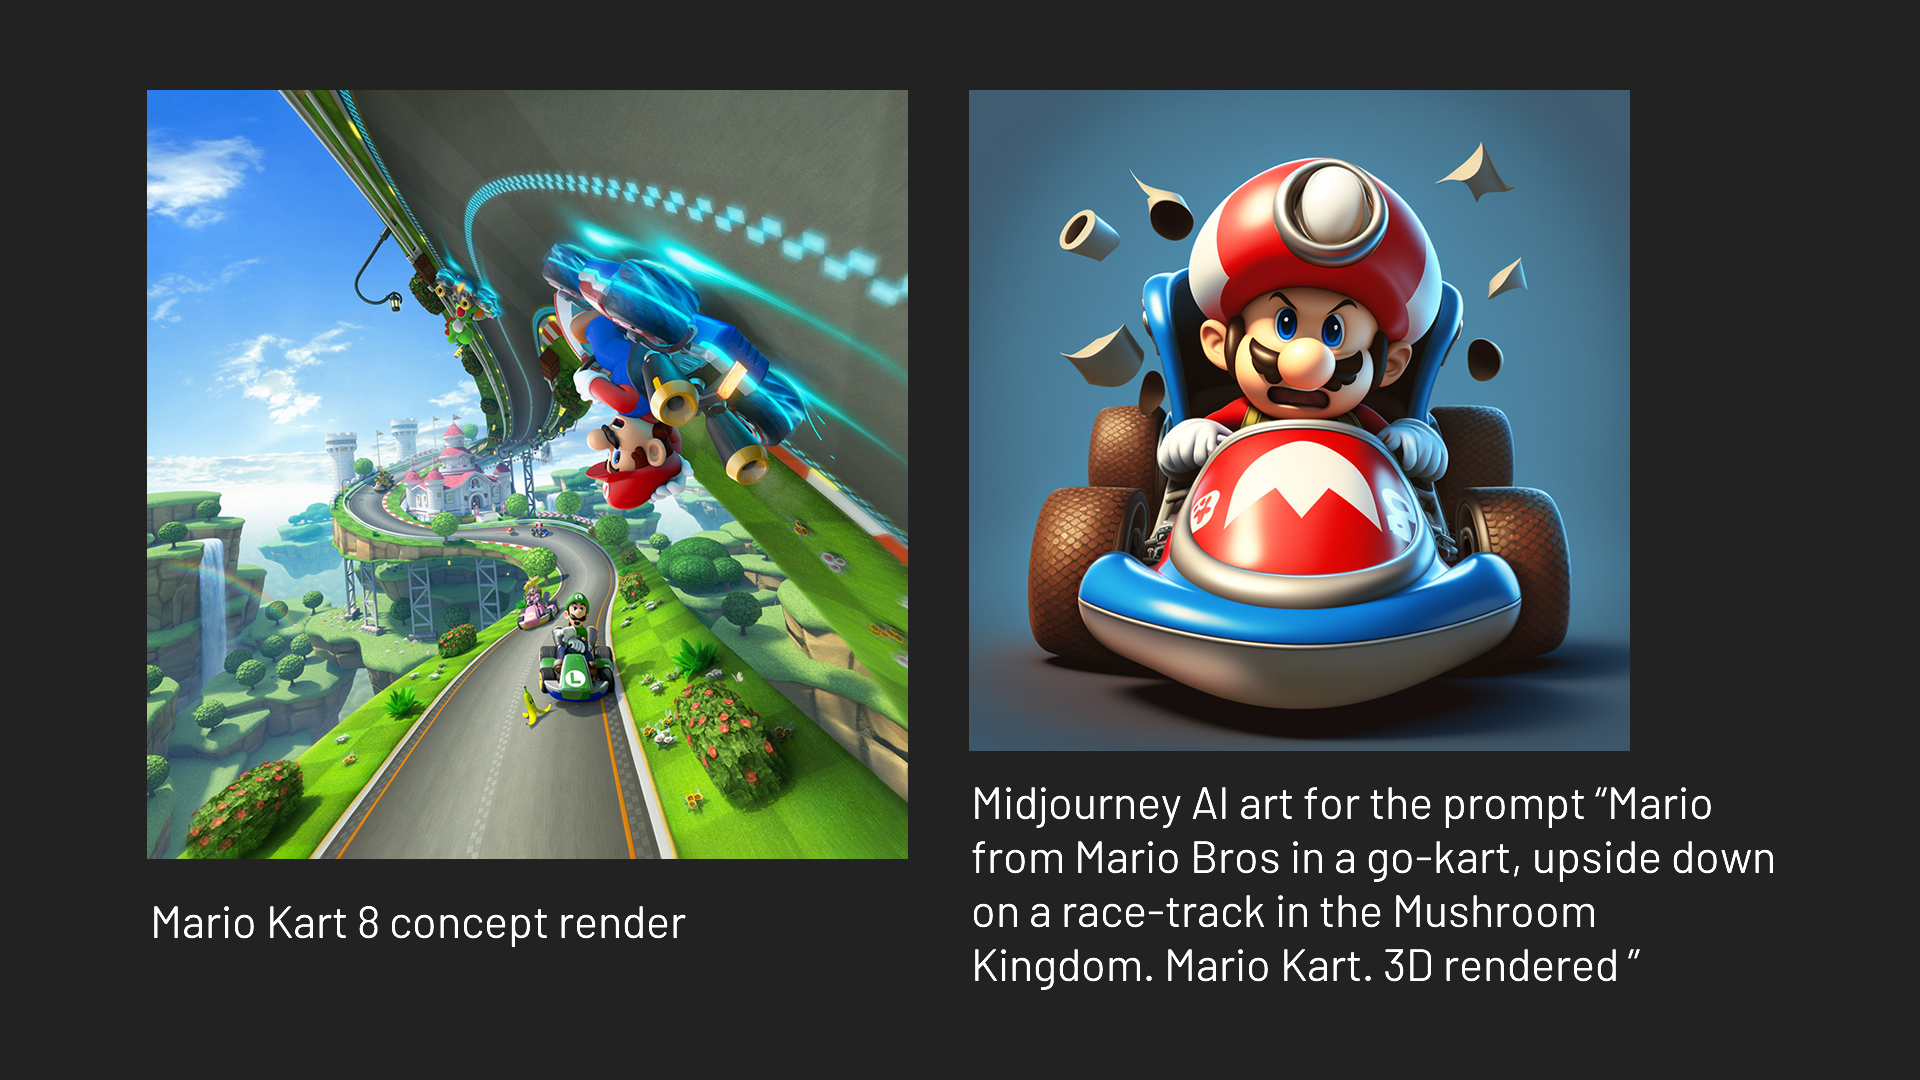 Two images of Mario Kart, one made by humans and rendered in 3D, the other by AI